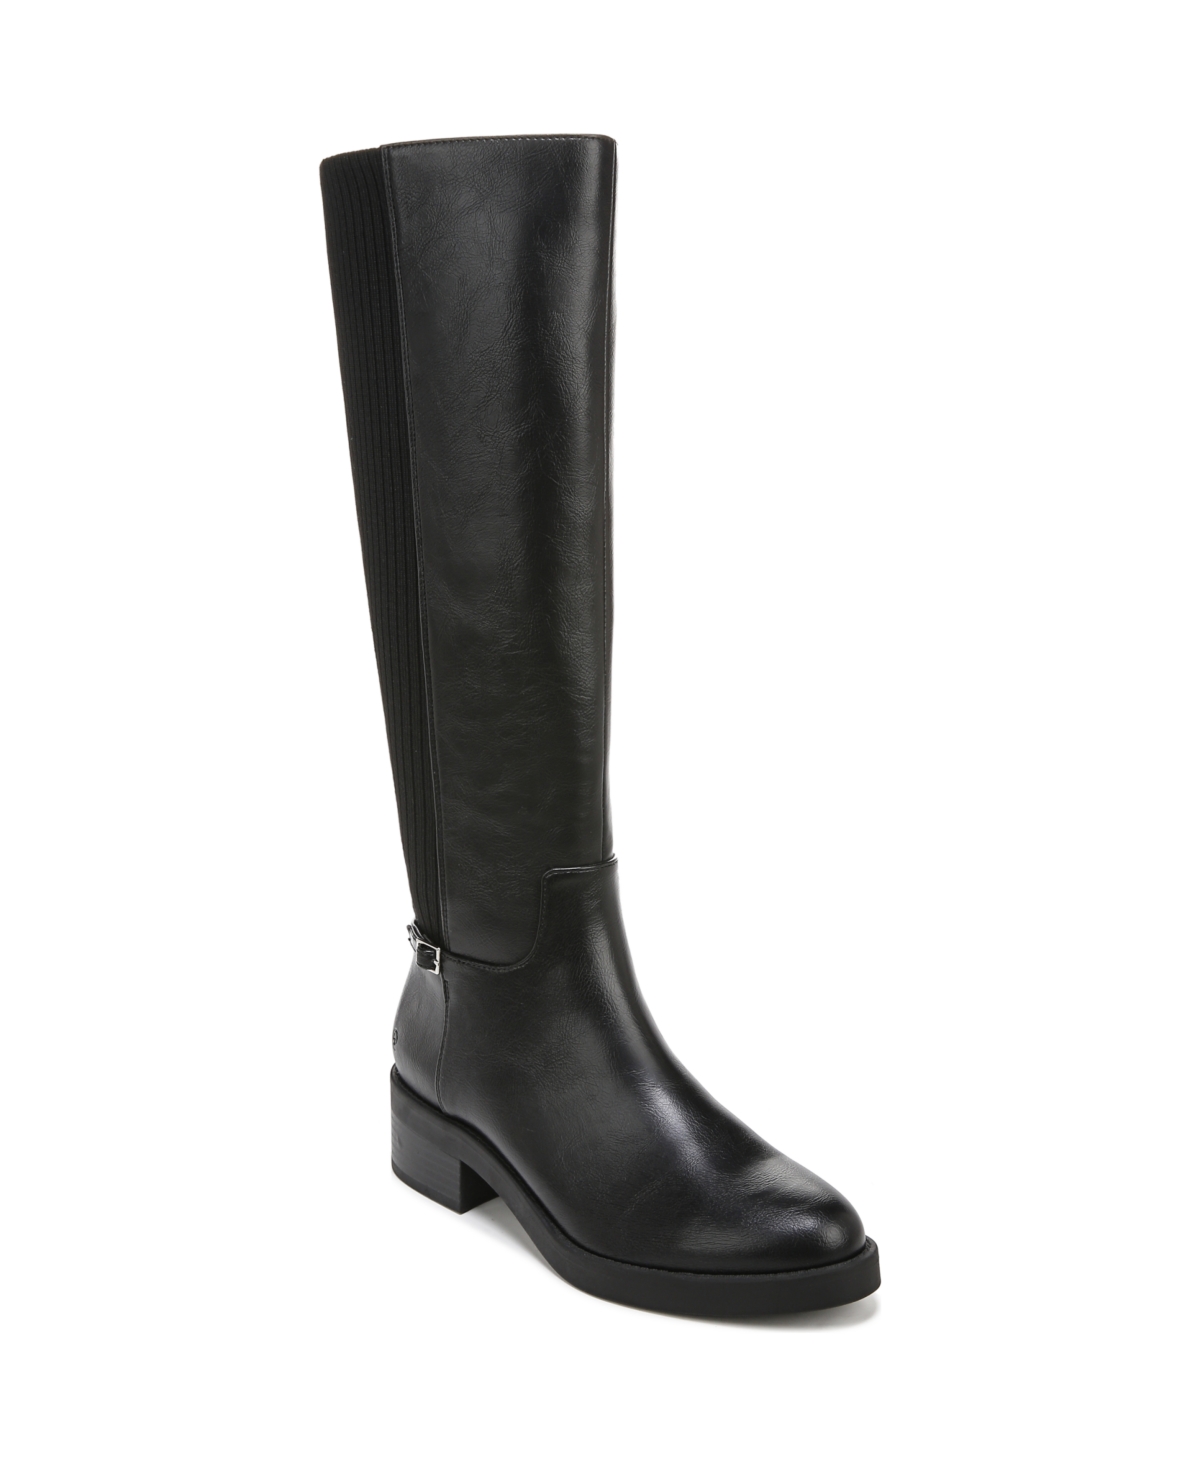 Bristol Knee High Boots - Black Faux Leather